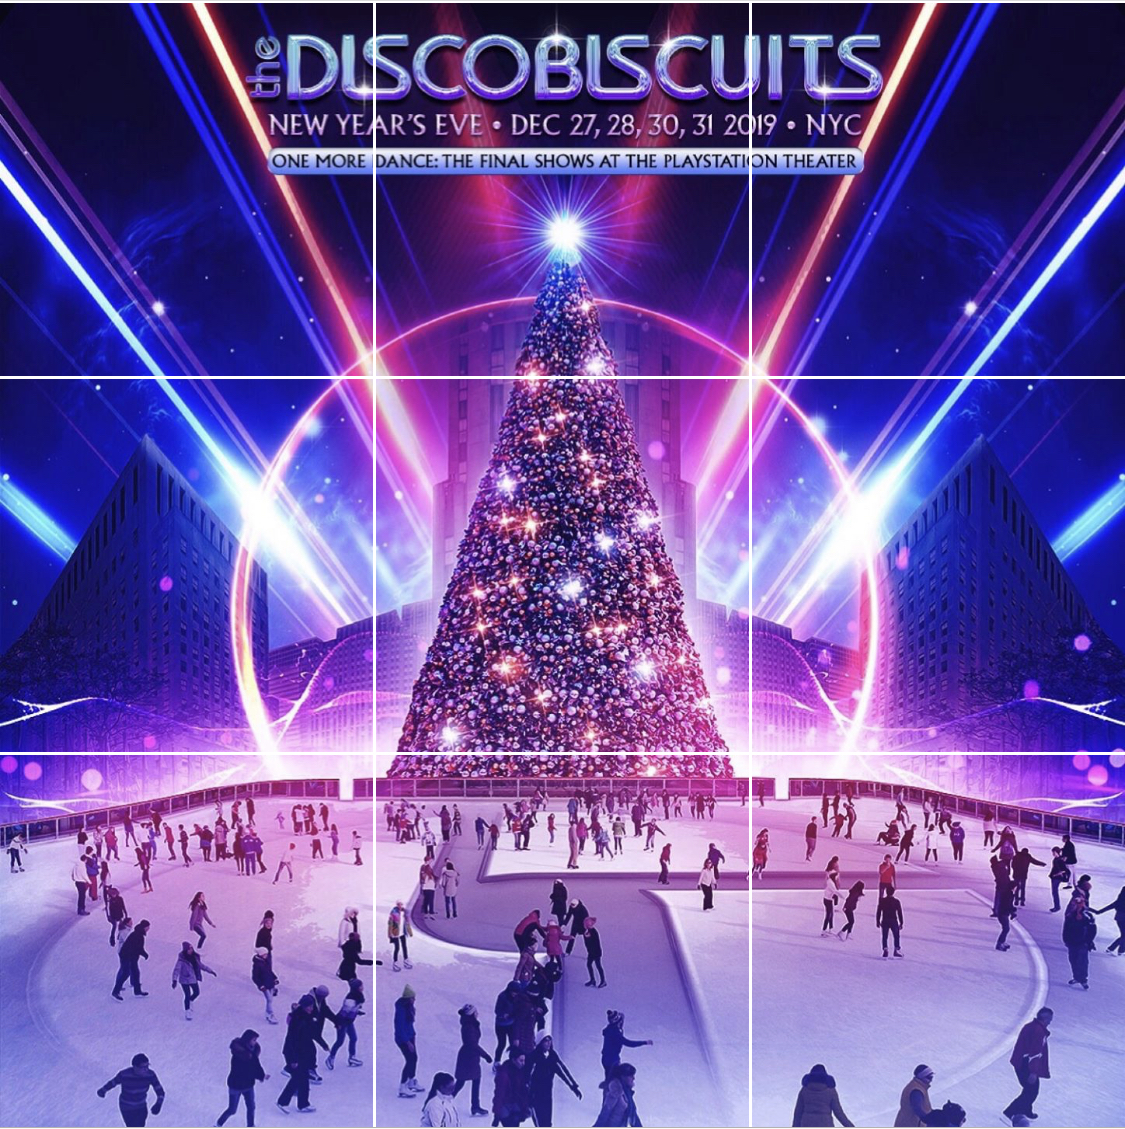 Disco Biscuits Announce New Year's Eve Run Playstation Theater in NYC